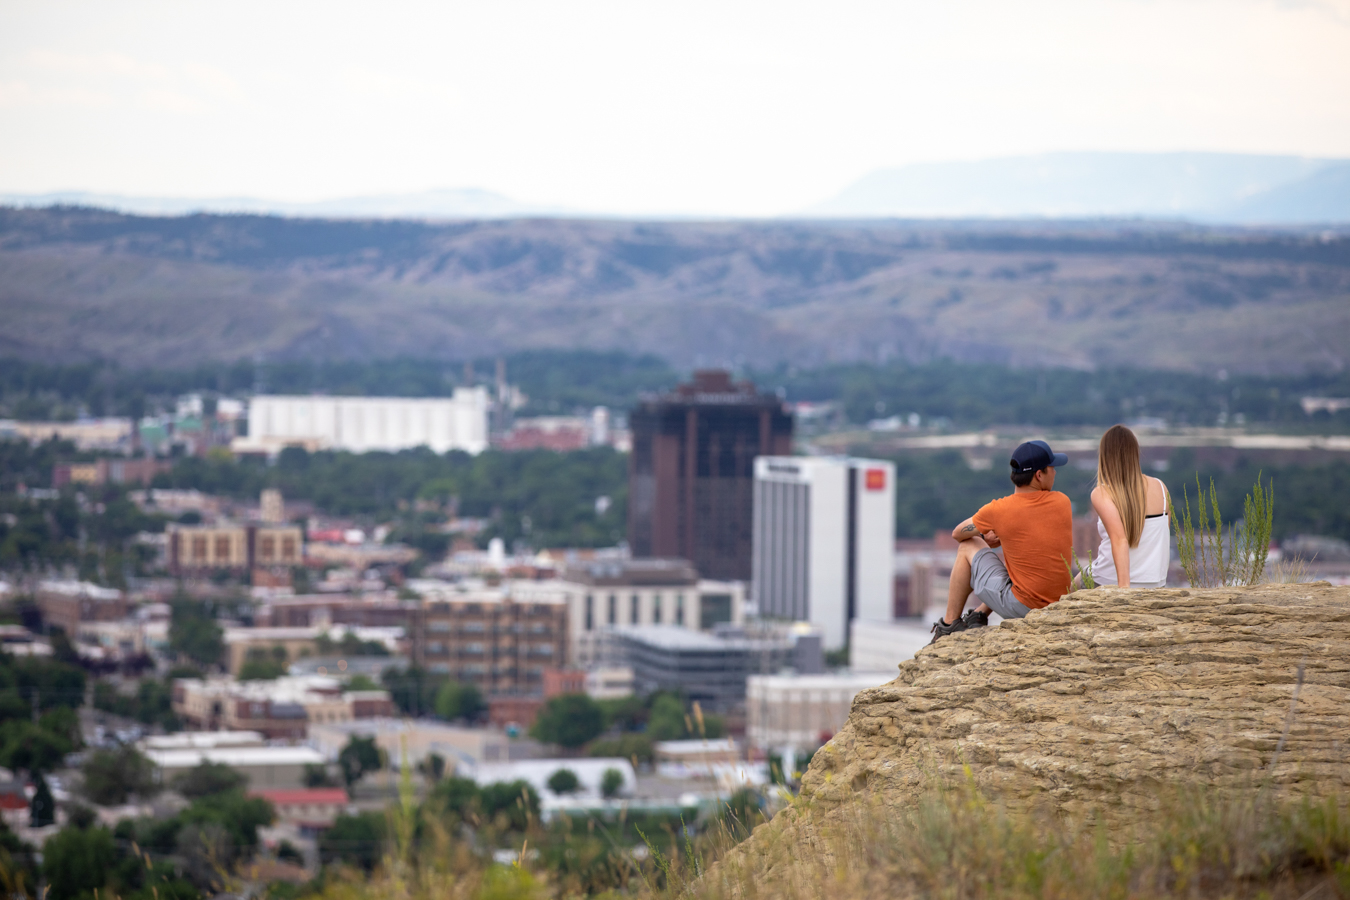 Couple at Swords Park with Downtown Billings, Montana in the background